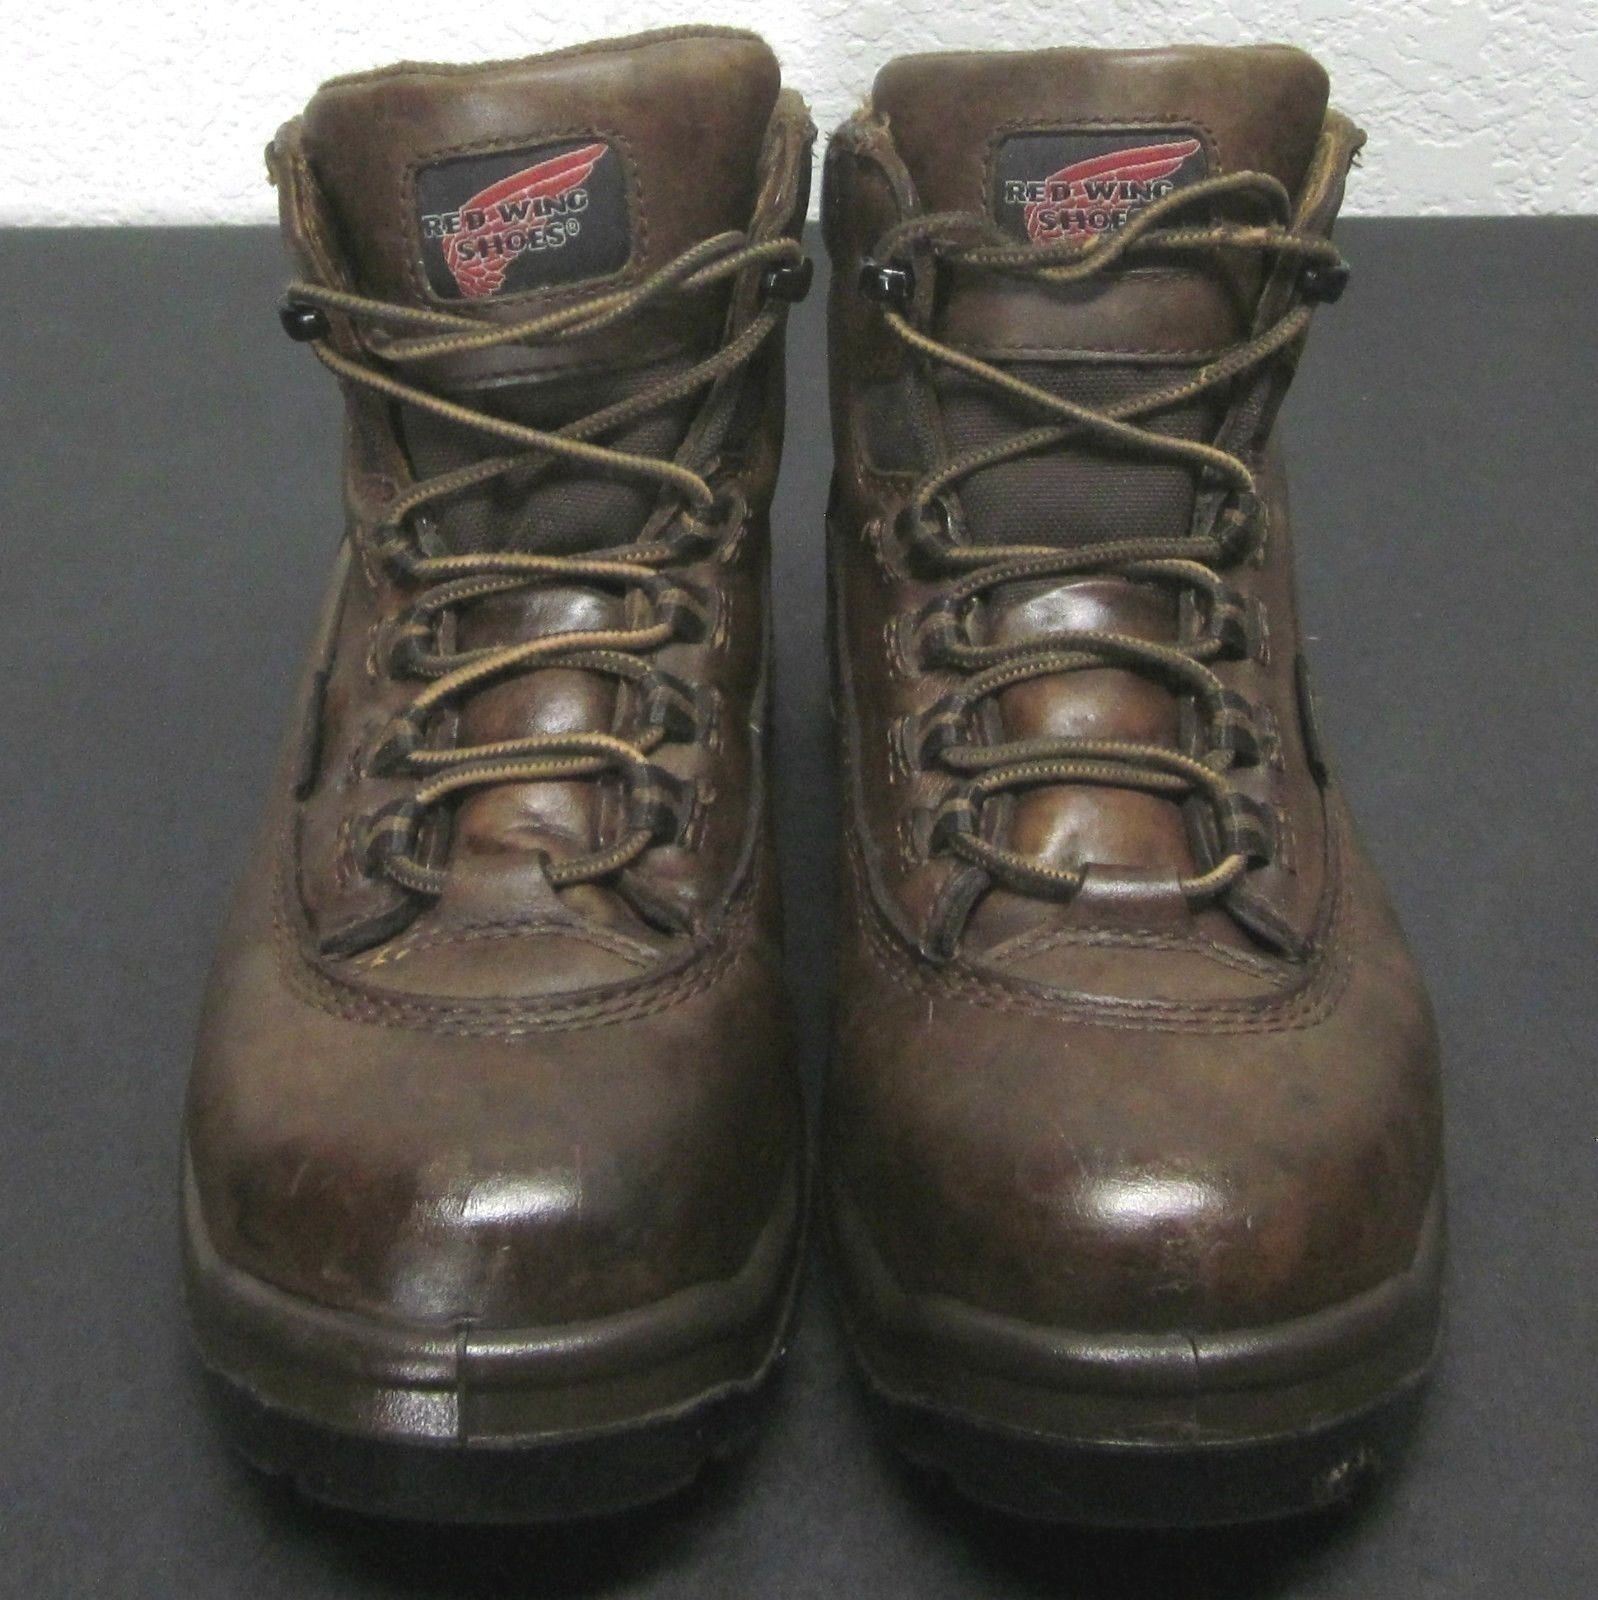 RED WING 2327 WOMEN'S SIZE 6.5D BROWN LACE UP ANKLE BOOTS STEEL TOE ...